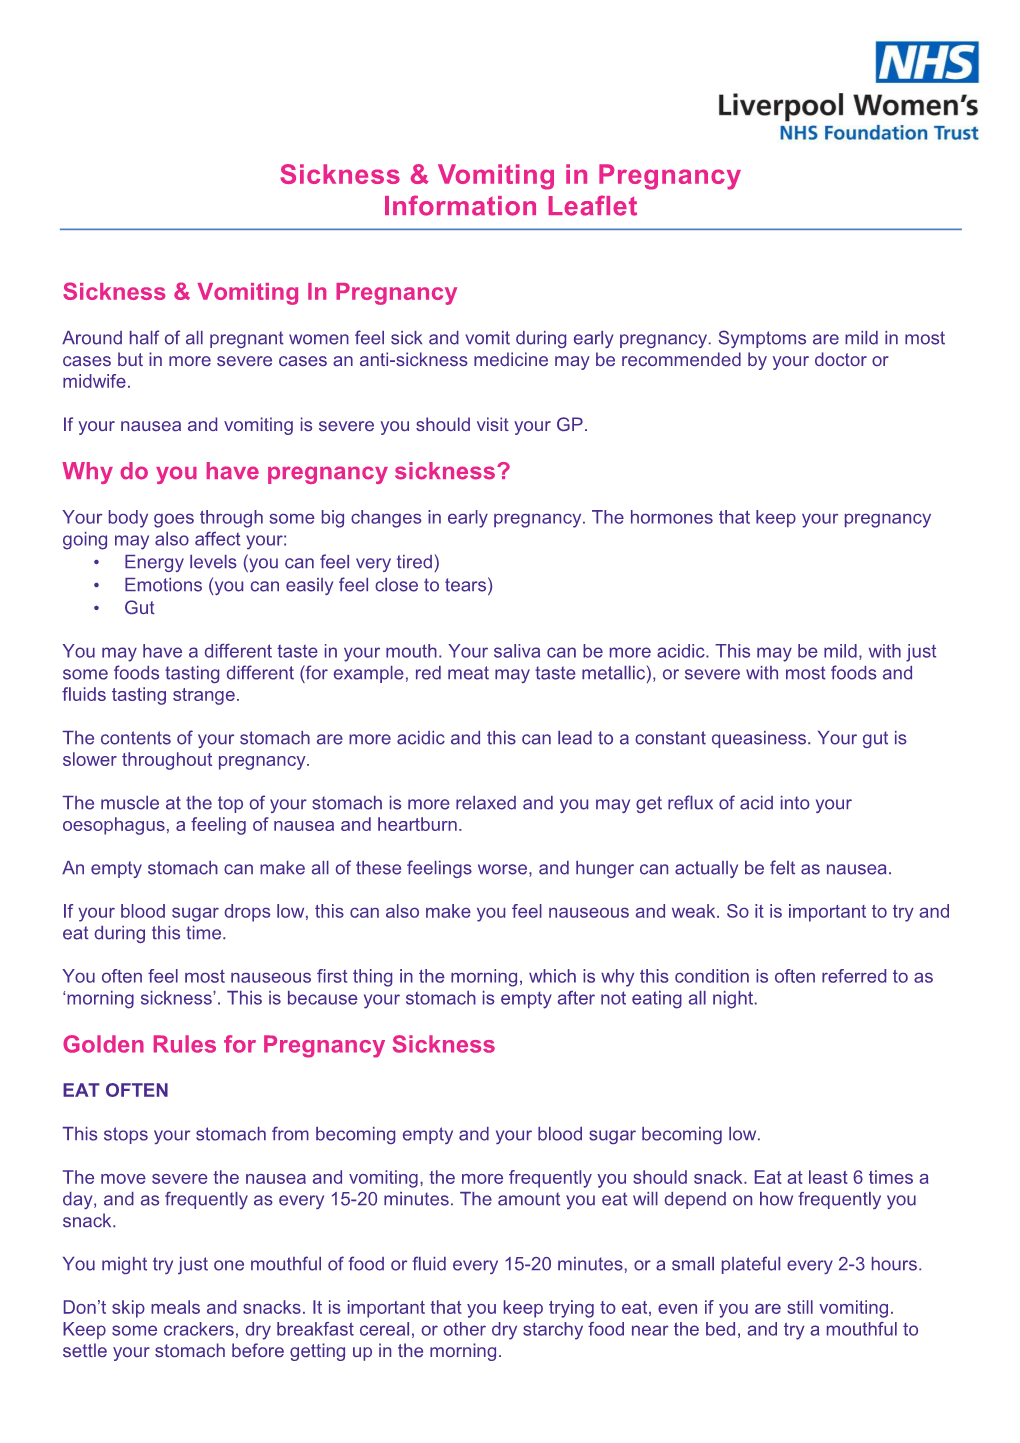 Die 2018-192-V2 Issue Date: 01/03/2015 Review Date: 28/09/2021 © Liverpool Women’S NHS Foundation Trust